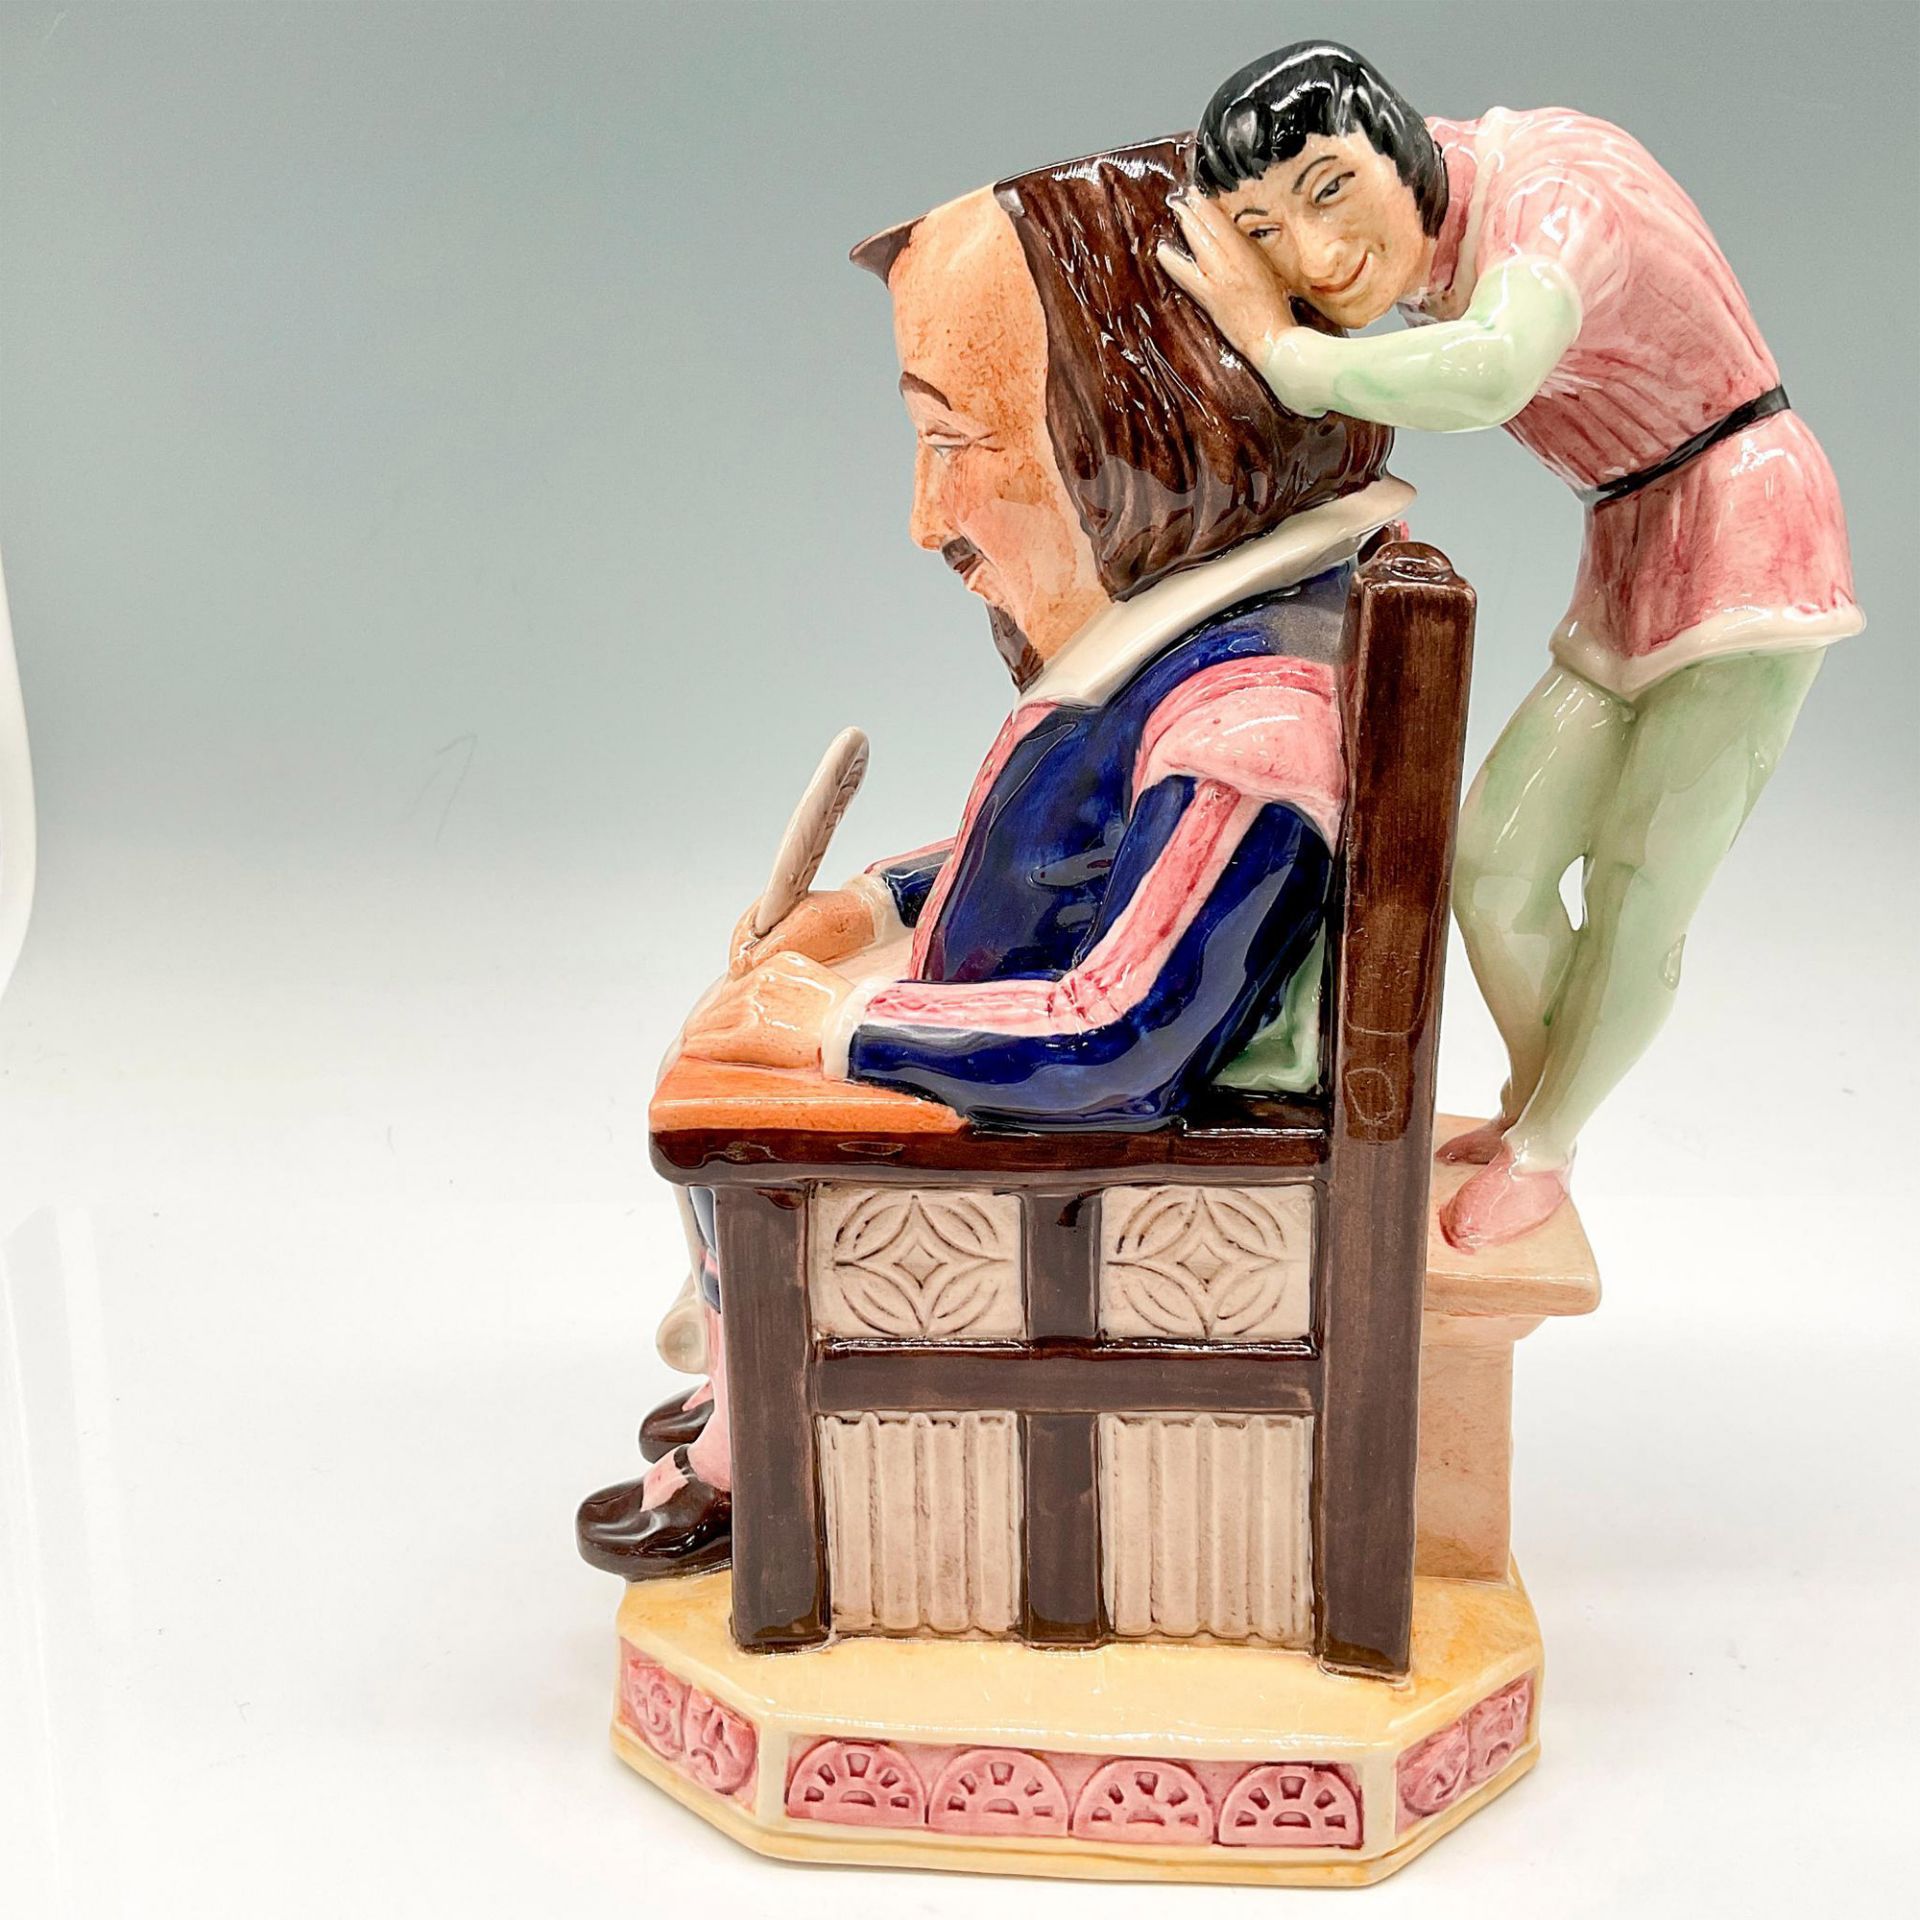 Kevin Francis Ceramics Toby Jug, William Shakespeare - Image 2 of 4